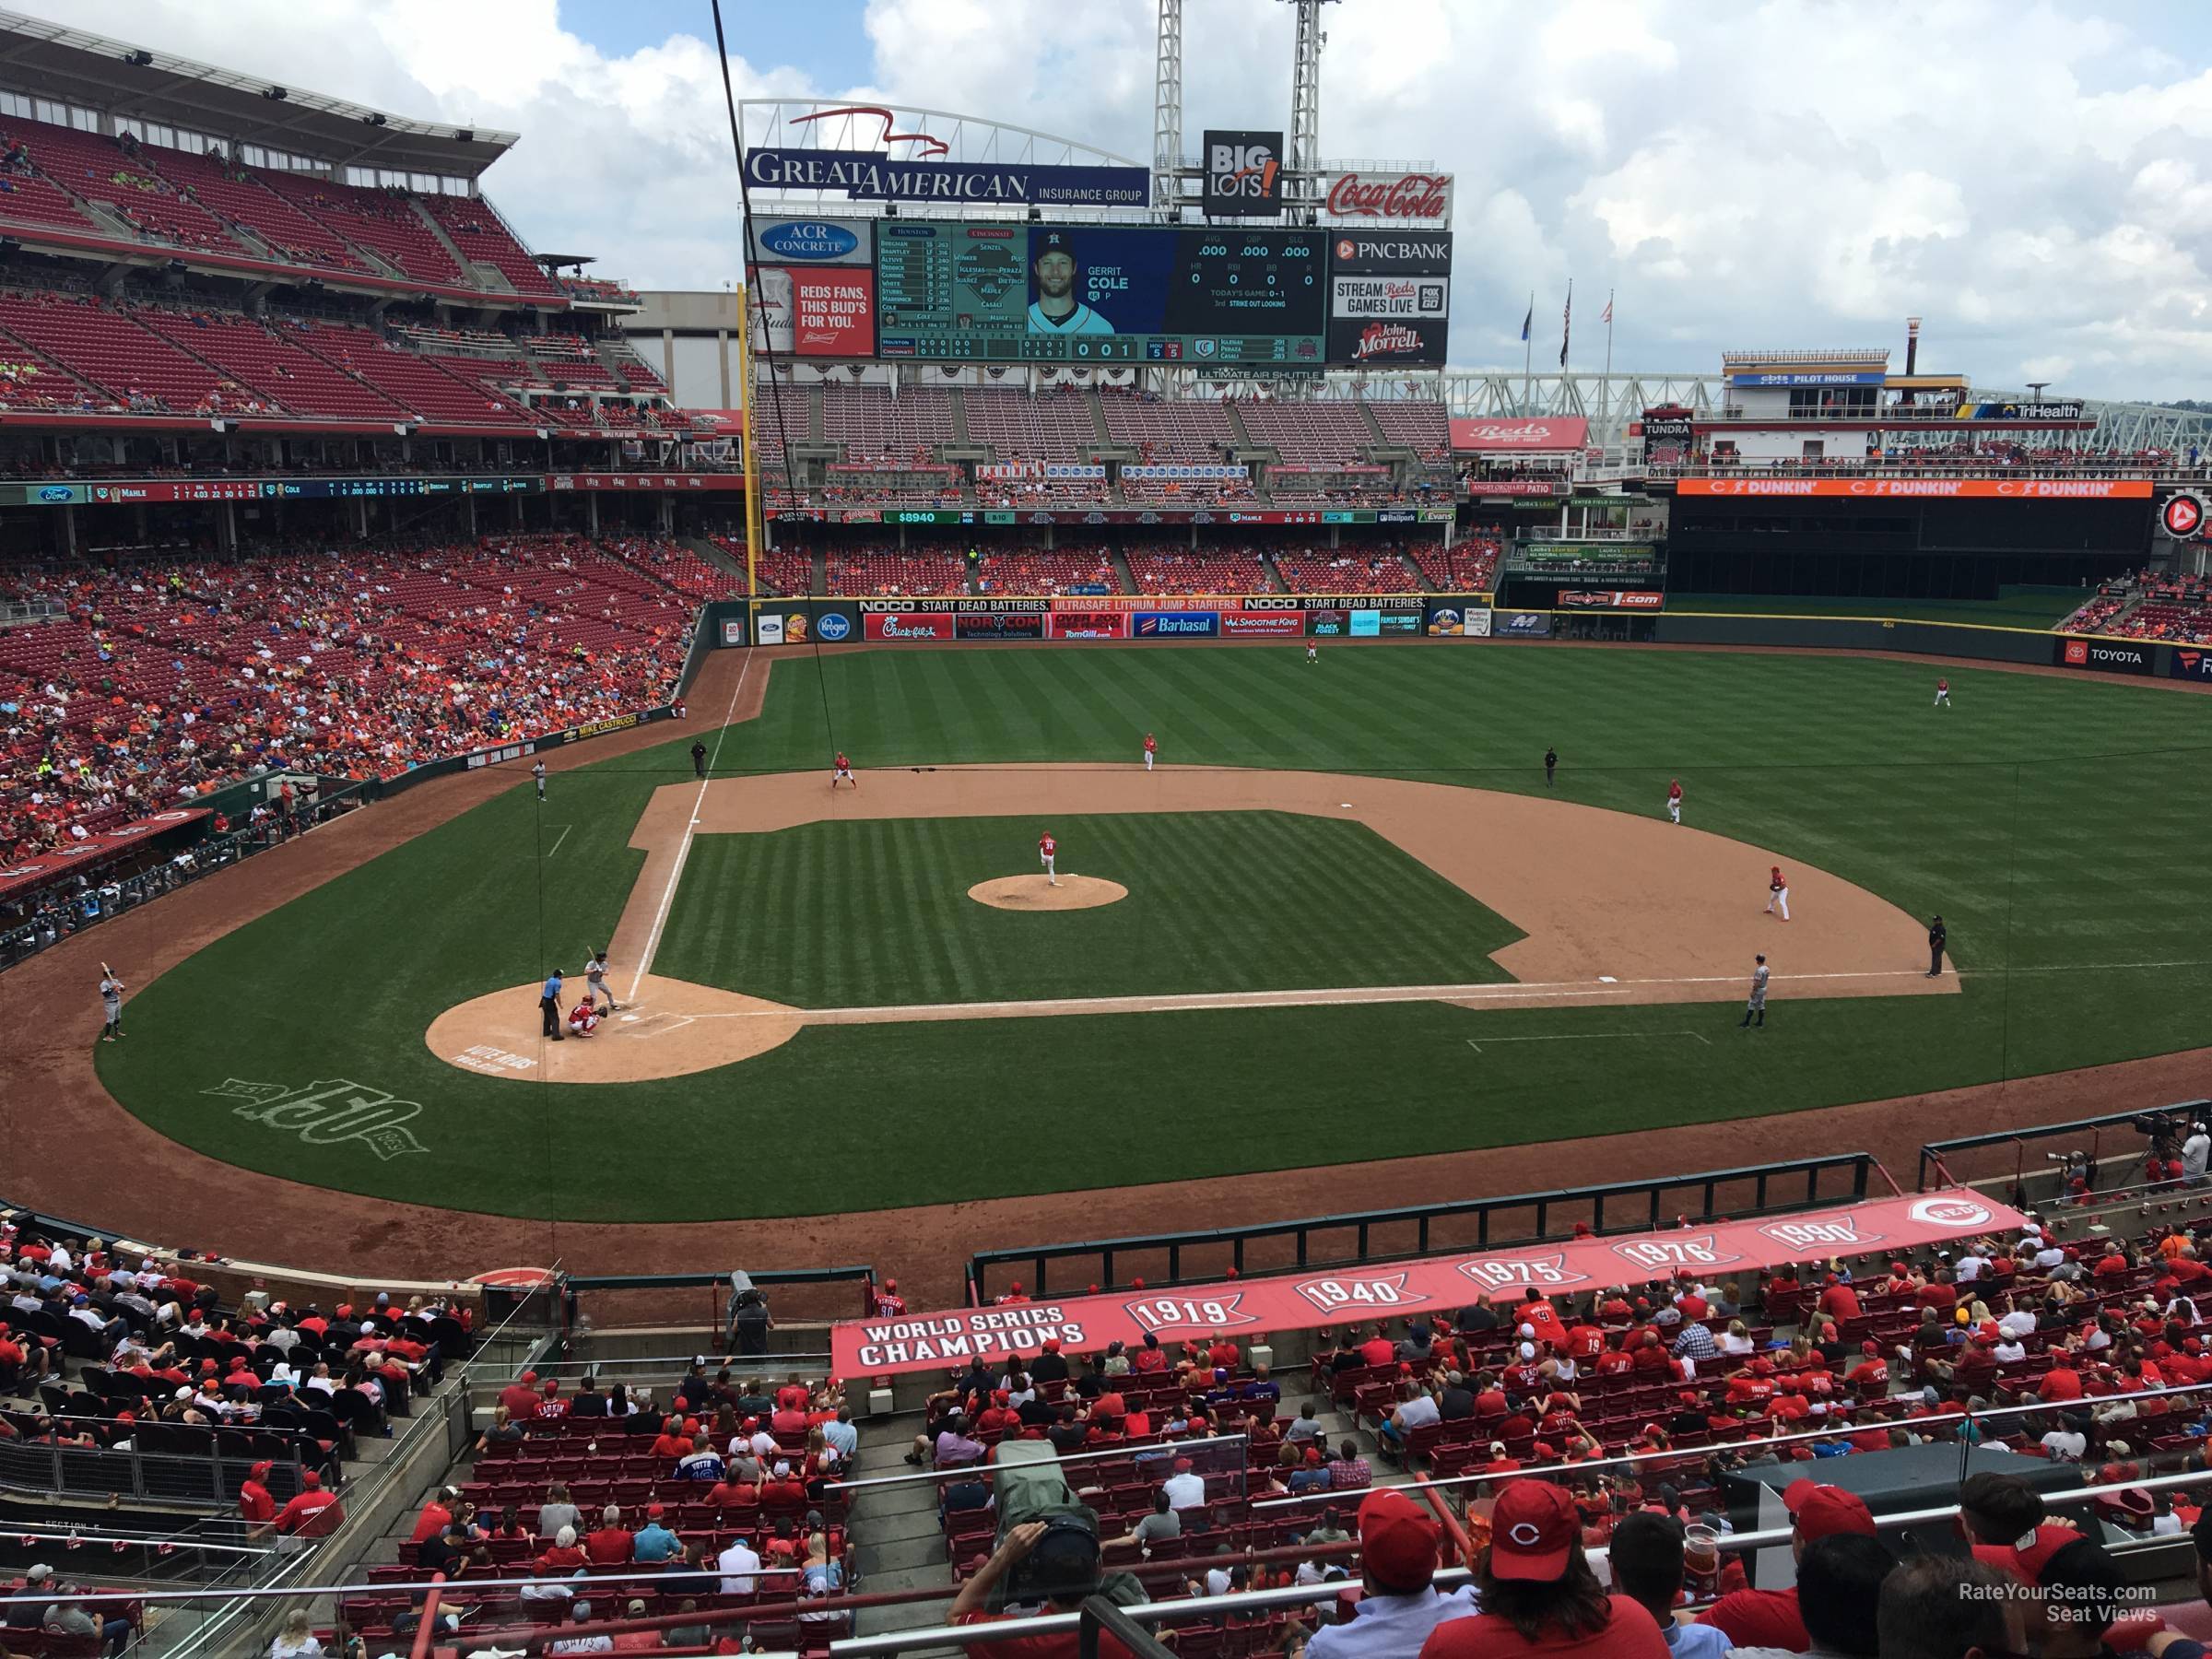 Section 228 at Great American Ball Park 